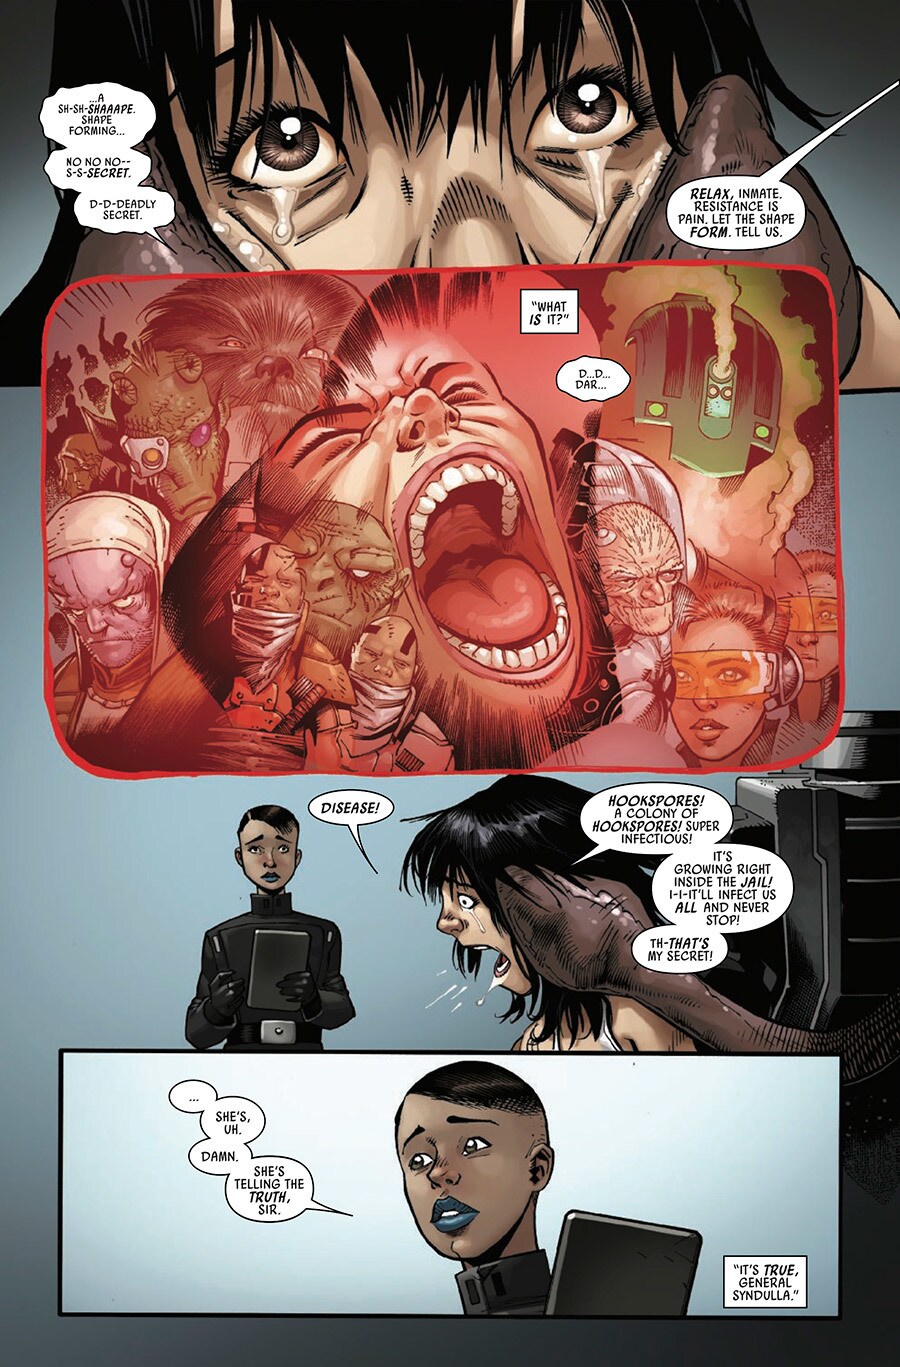 Aphra gets her mind probed painfully by an alien, revealing she knows about a Hookspore infestation in this series of comic panels.